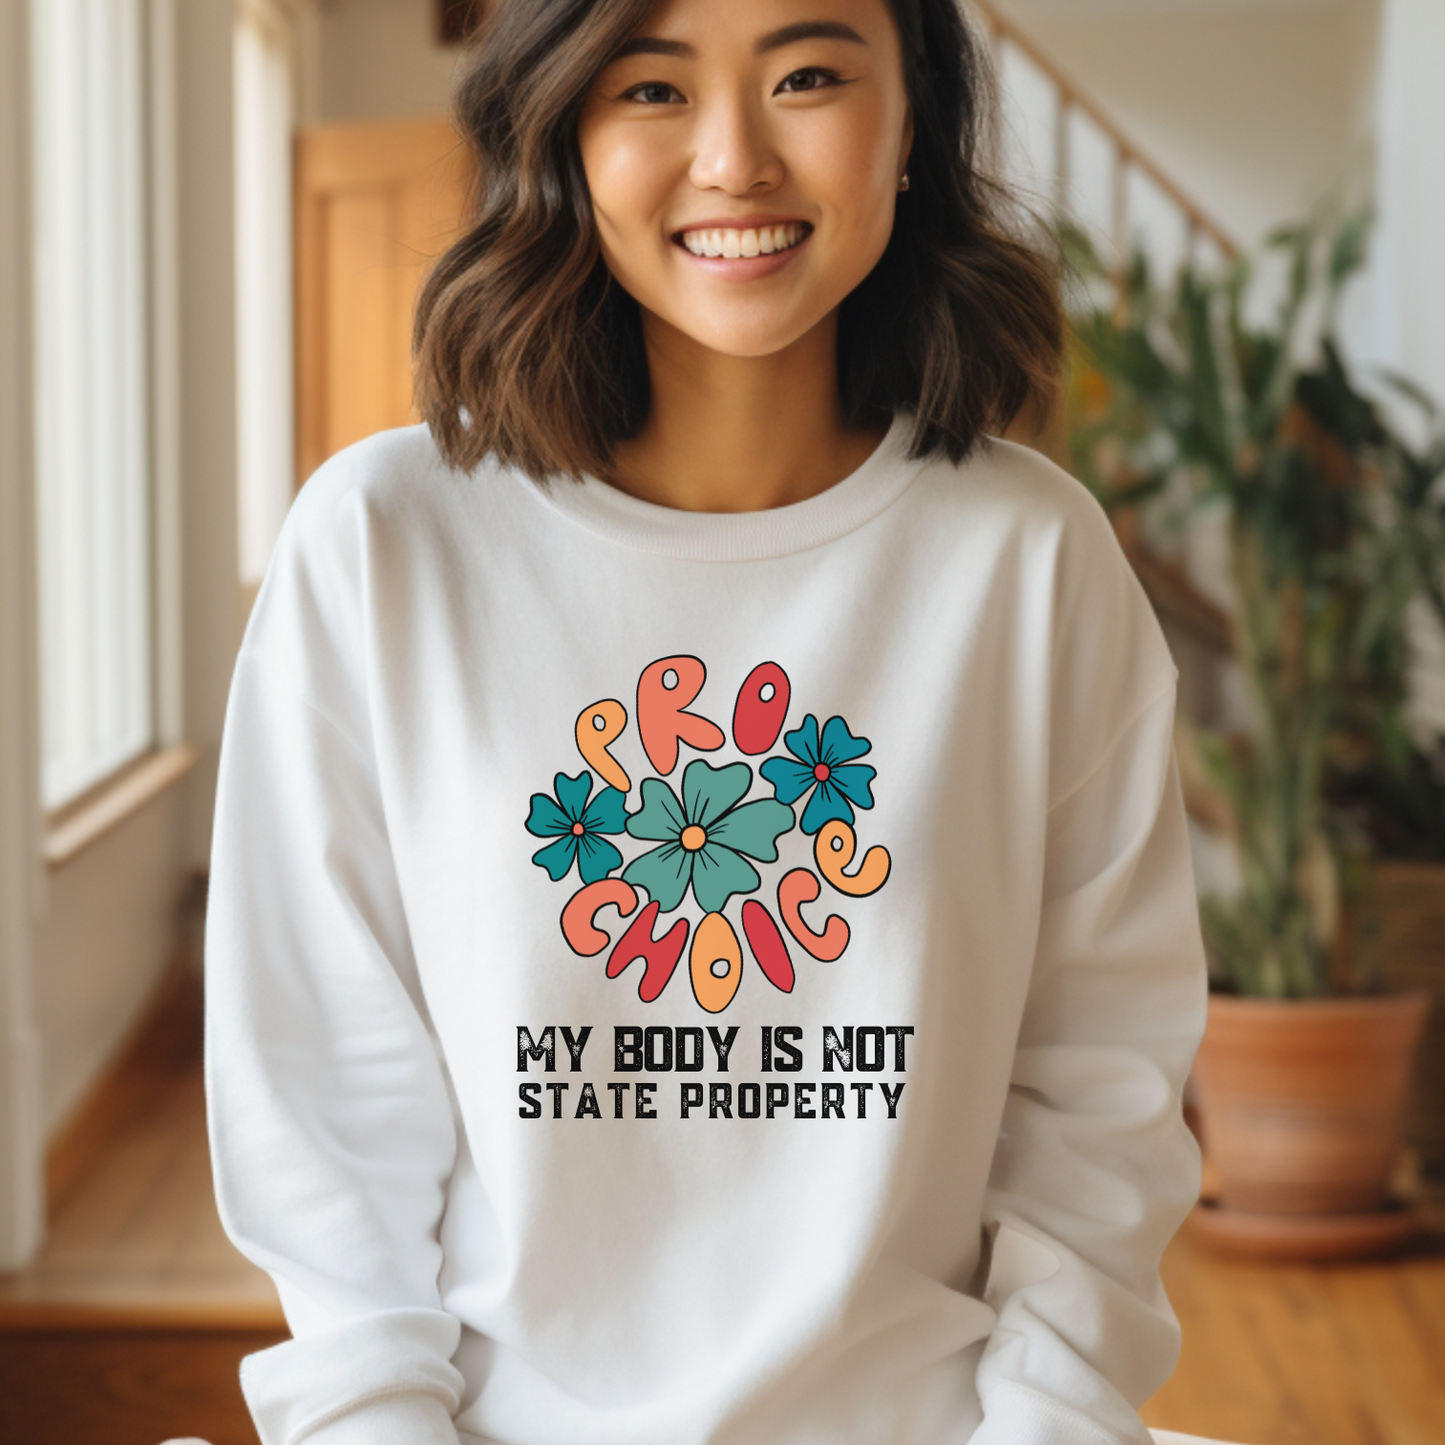 White is the perfect background for this colorful retro design on a Comfort Colors 1566 sweatshirt with a powerful pro-choice message. 